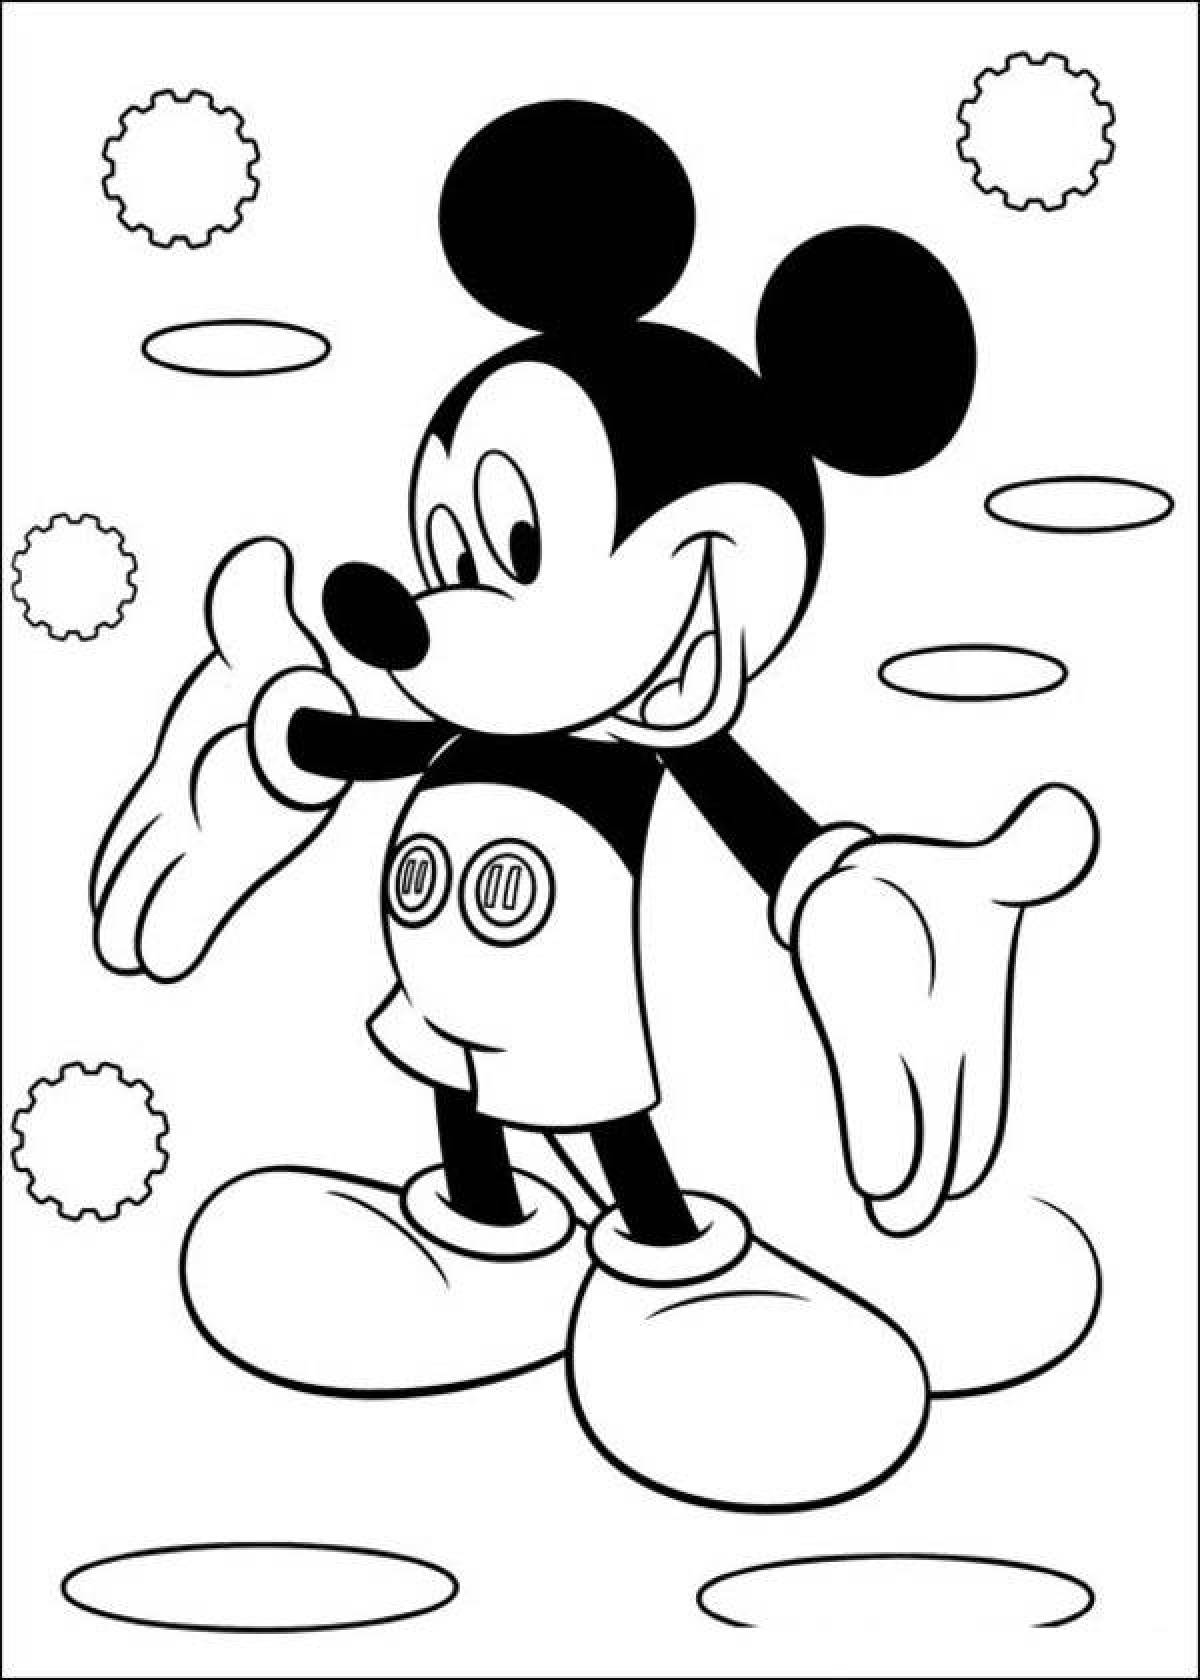 Violent mickey mouse coloring book